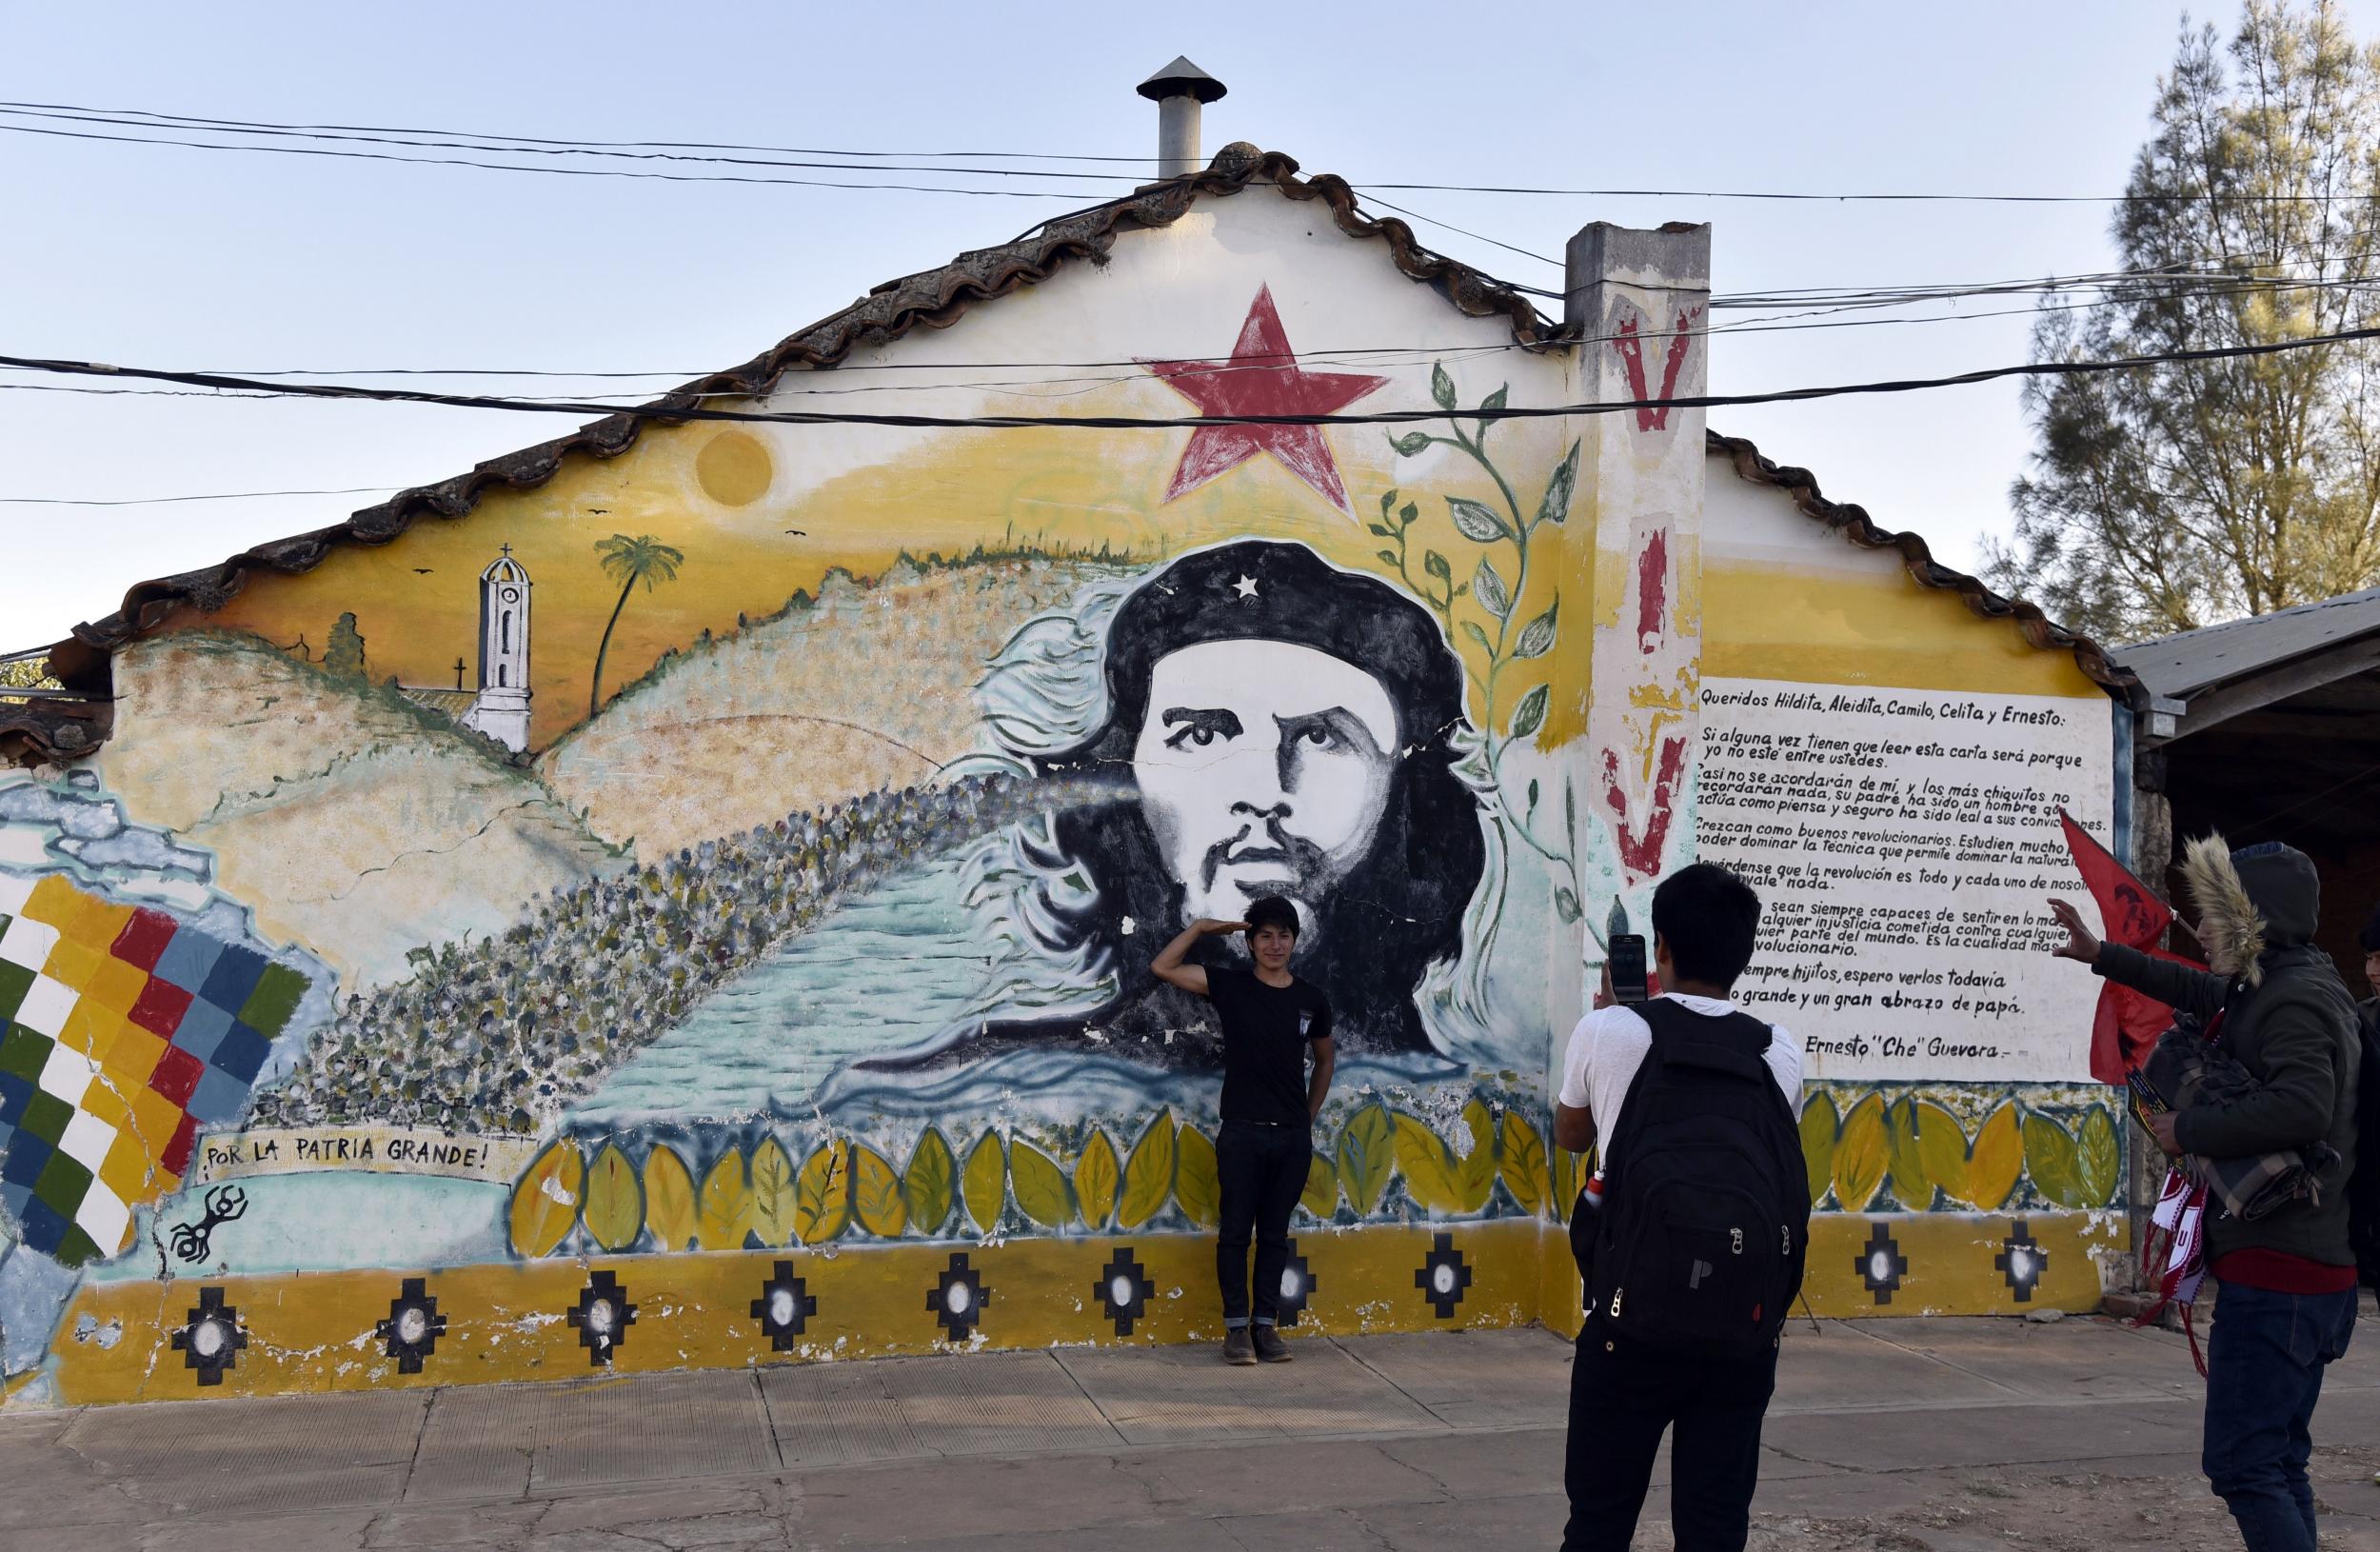 Bolivian soldier who executed Che Guevara dies